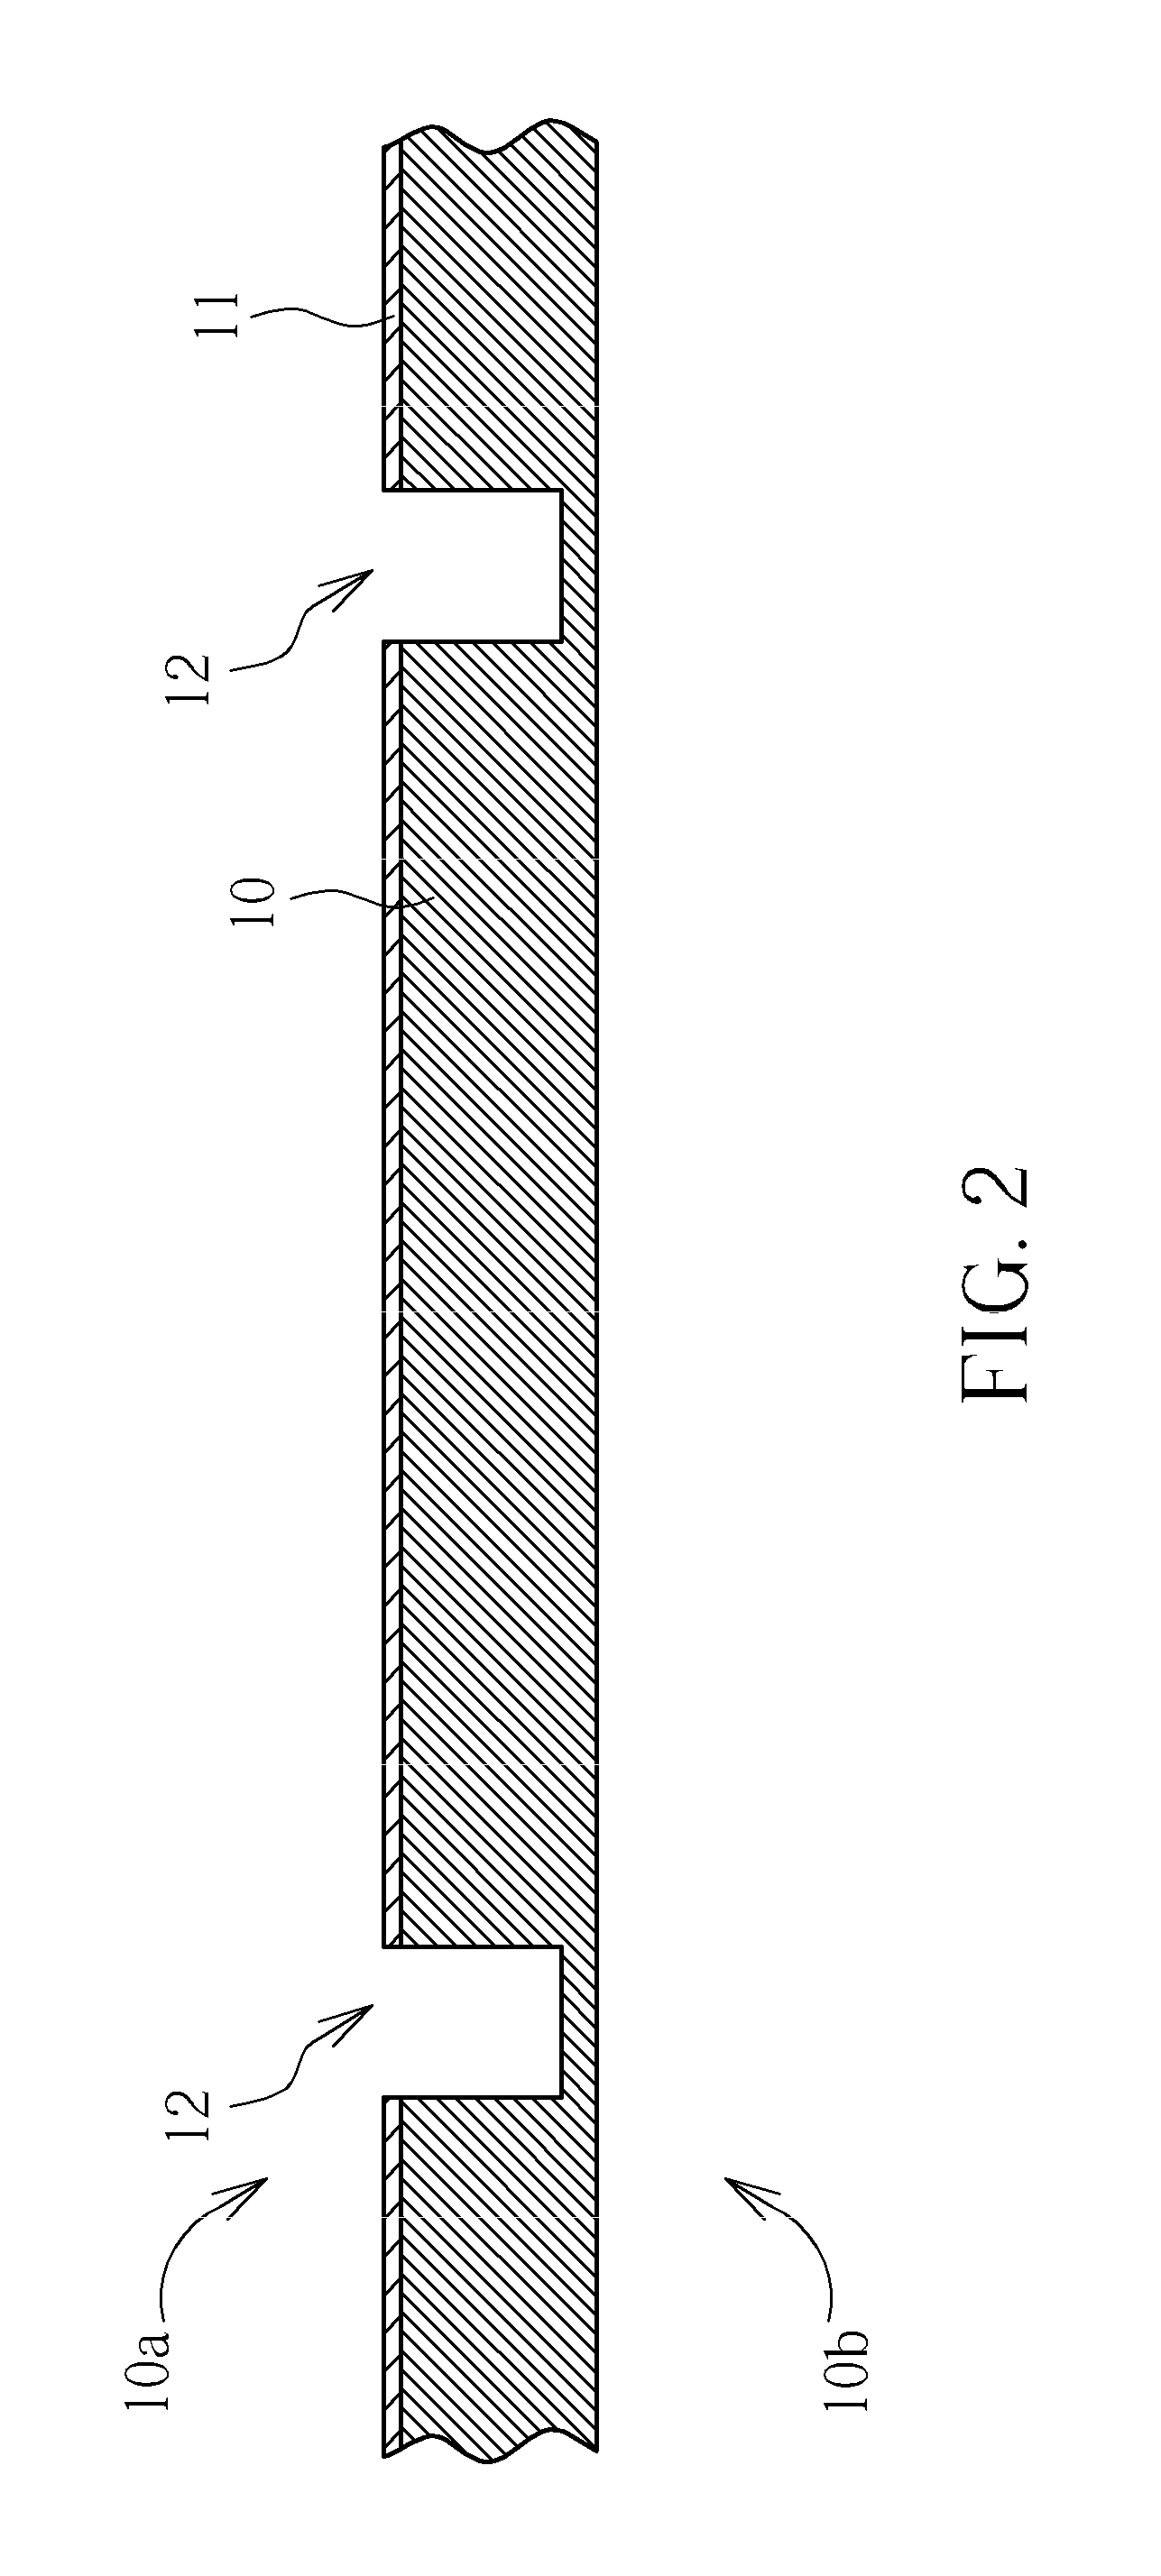 High-reflection submount for light-emitting diode package and fabrication method thereof